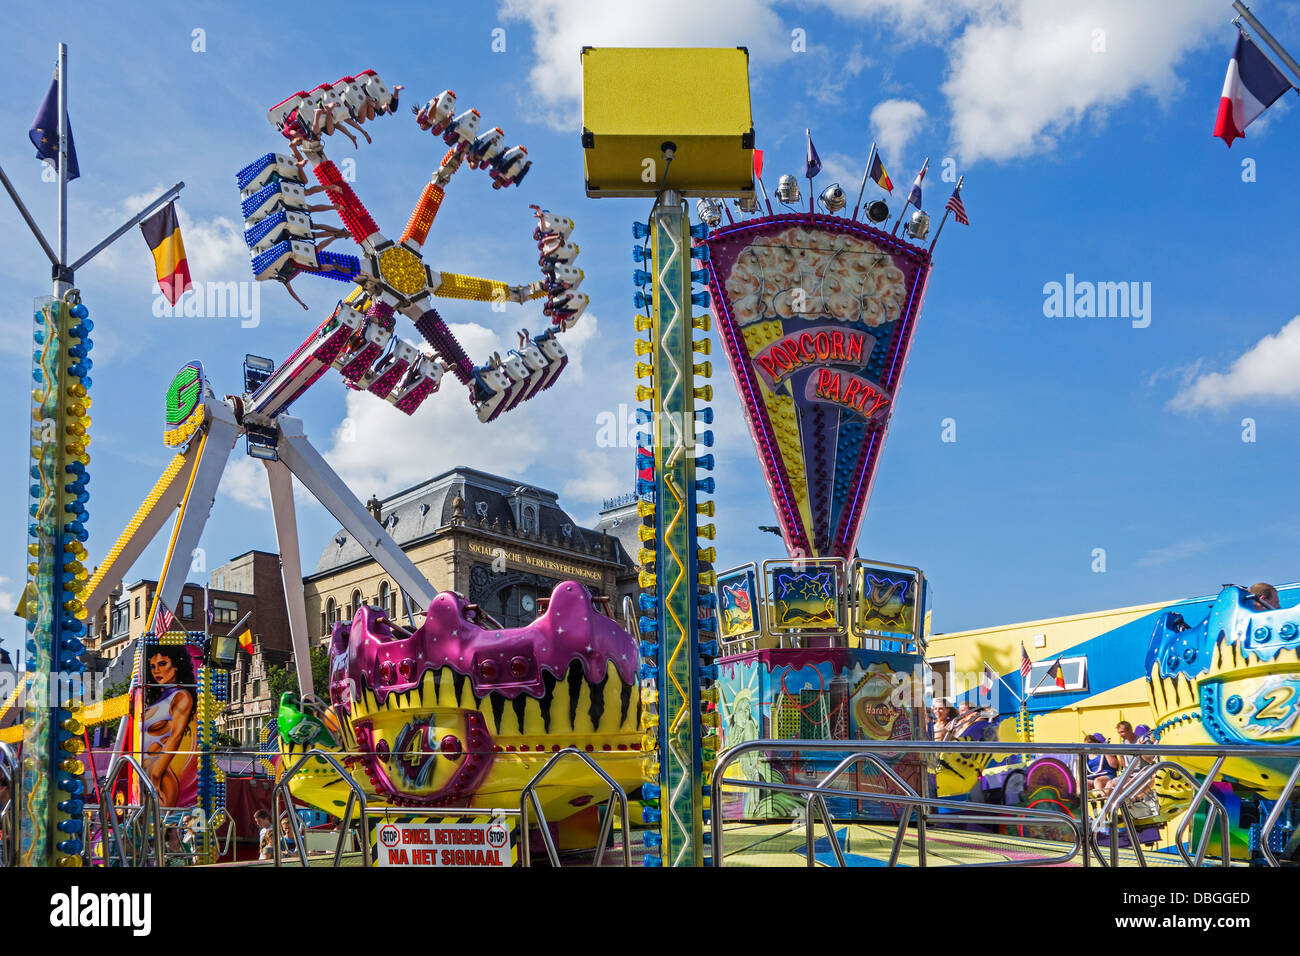 Fairground attractions at travelling funfair / traveling fun fair at the Gentse Feesten / Ghent Festivities in summer, Belgium Stock Photo